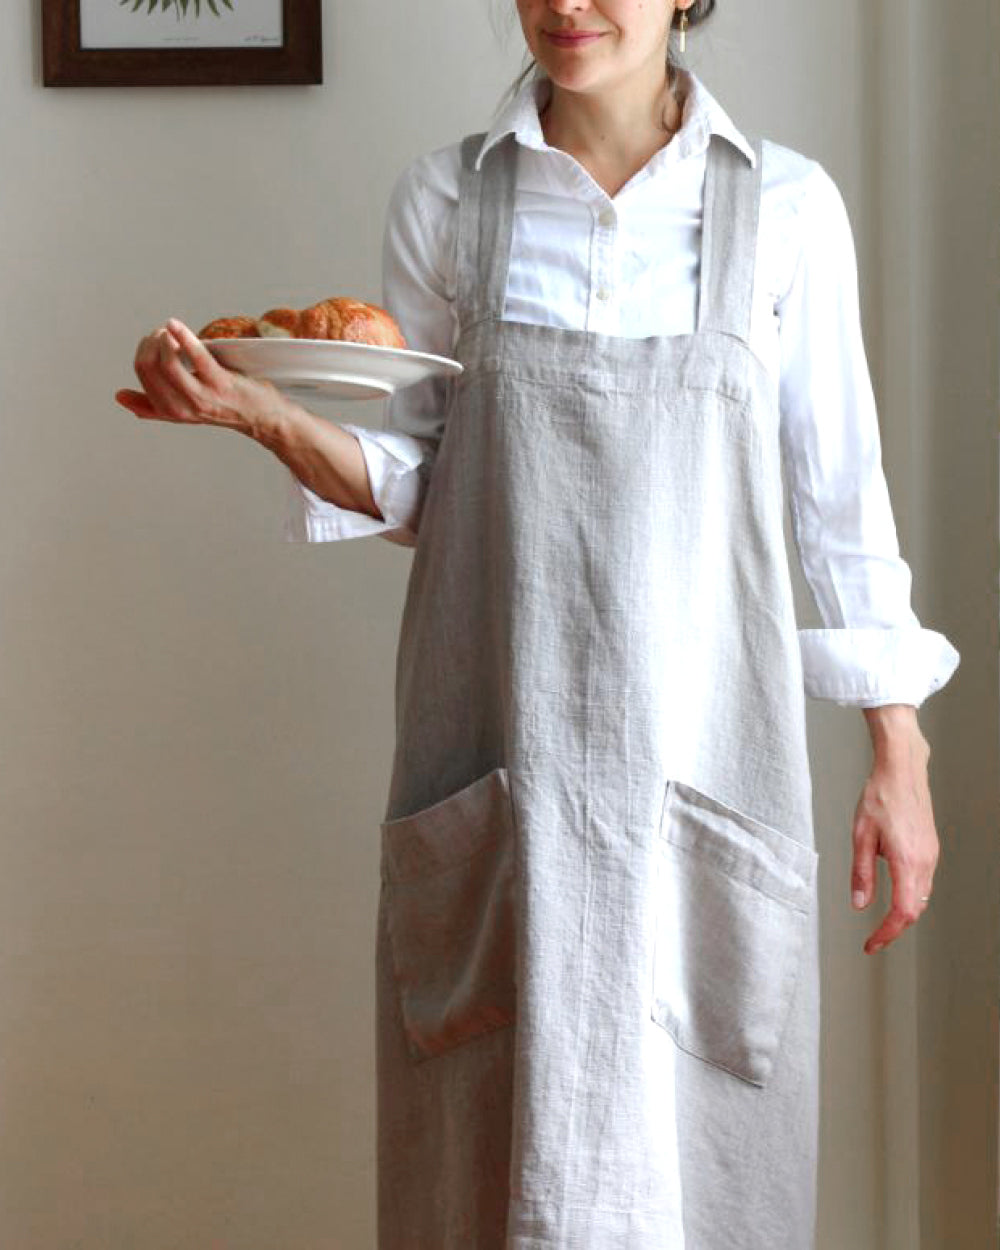 Person holding plate and wearing natural stone-washed linen apron